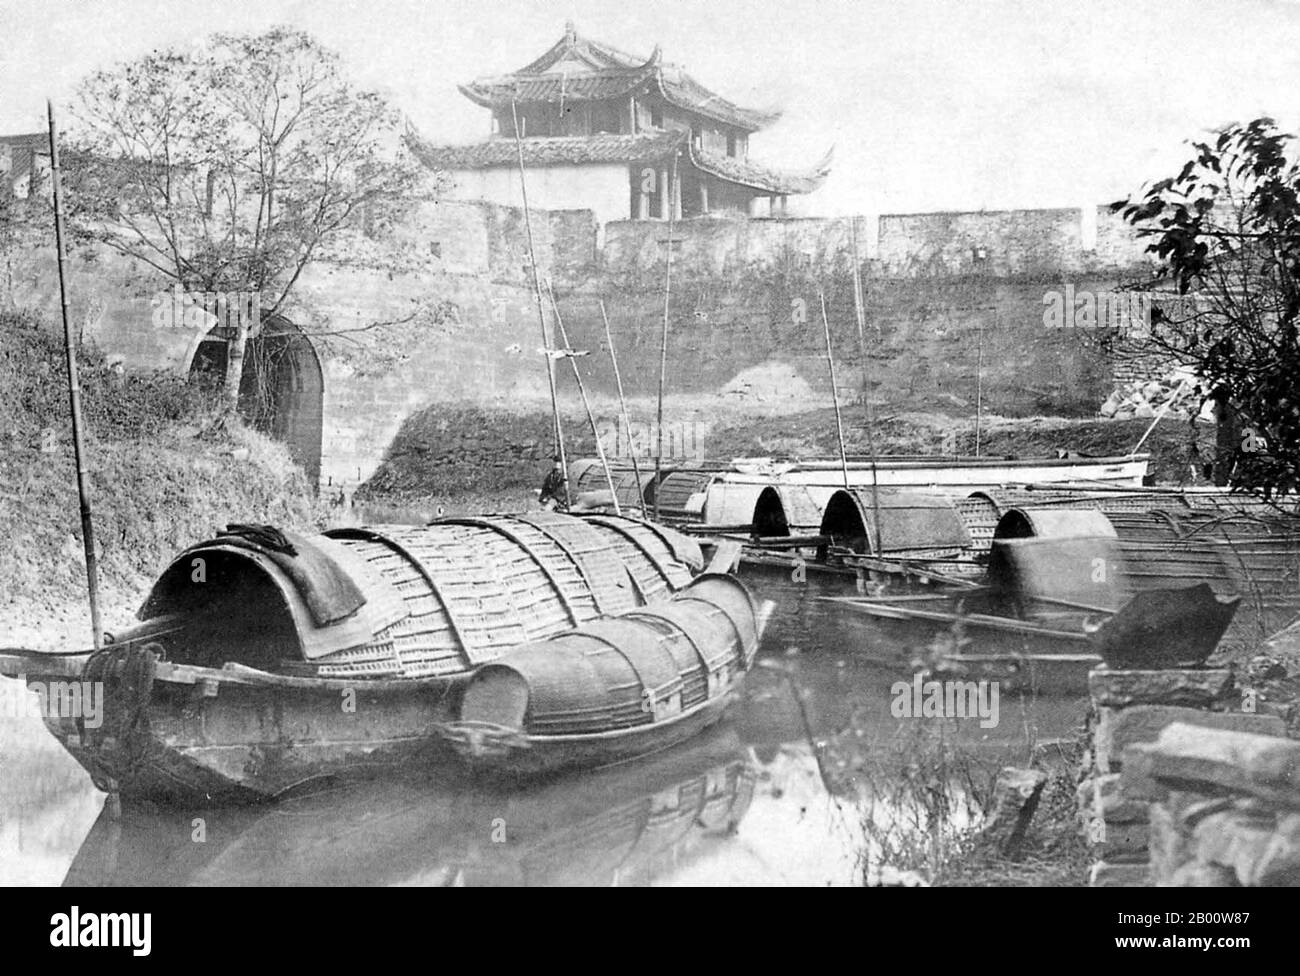 China: Covered boats by Shanghai City Wall, West Gate area, 1890s.  International attention to Shanghai grew in the 19th century due to its economic and trade potential at the Yangtze River. During the First Opium War (1839–1842), British forces temporarily held the city. The war ended with the 1842 Treaty of Nanjing, opening Shanghai and other ports to international trade.  In 1863, the British settlement, located to the south of Suzhou creek (Huangpu district), and the American settlement, to the north of Suzhou creek (Hongkou district), joined in order to form the International Settlement. Stock Photo